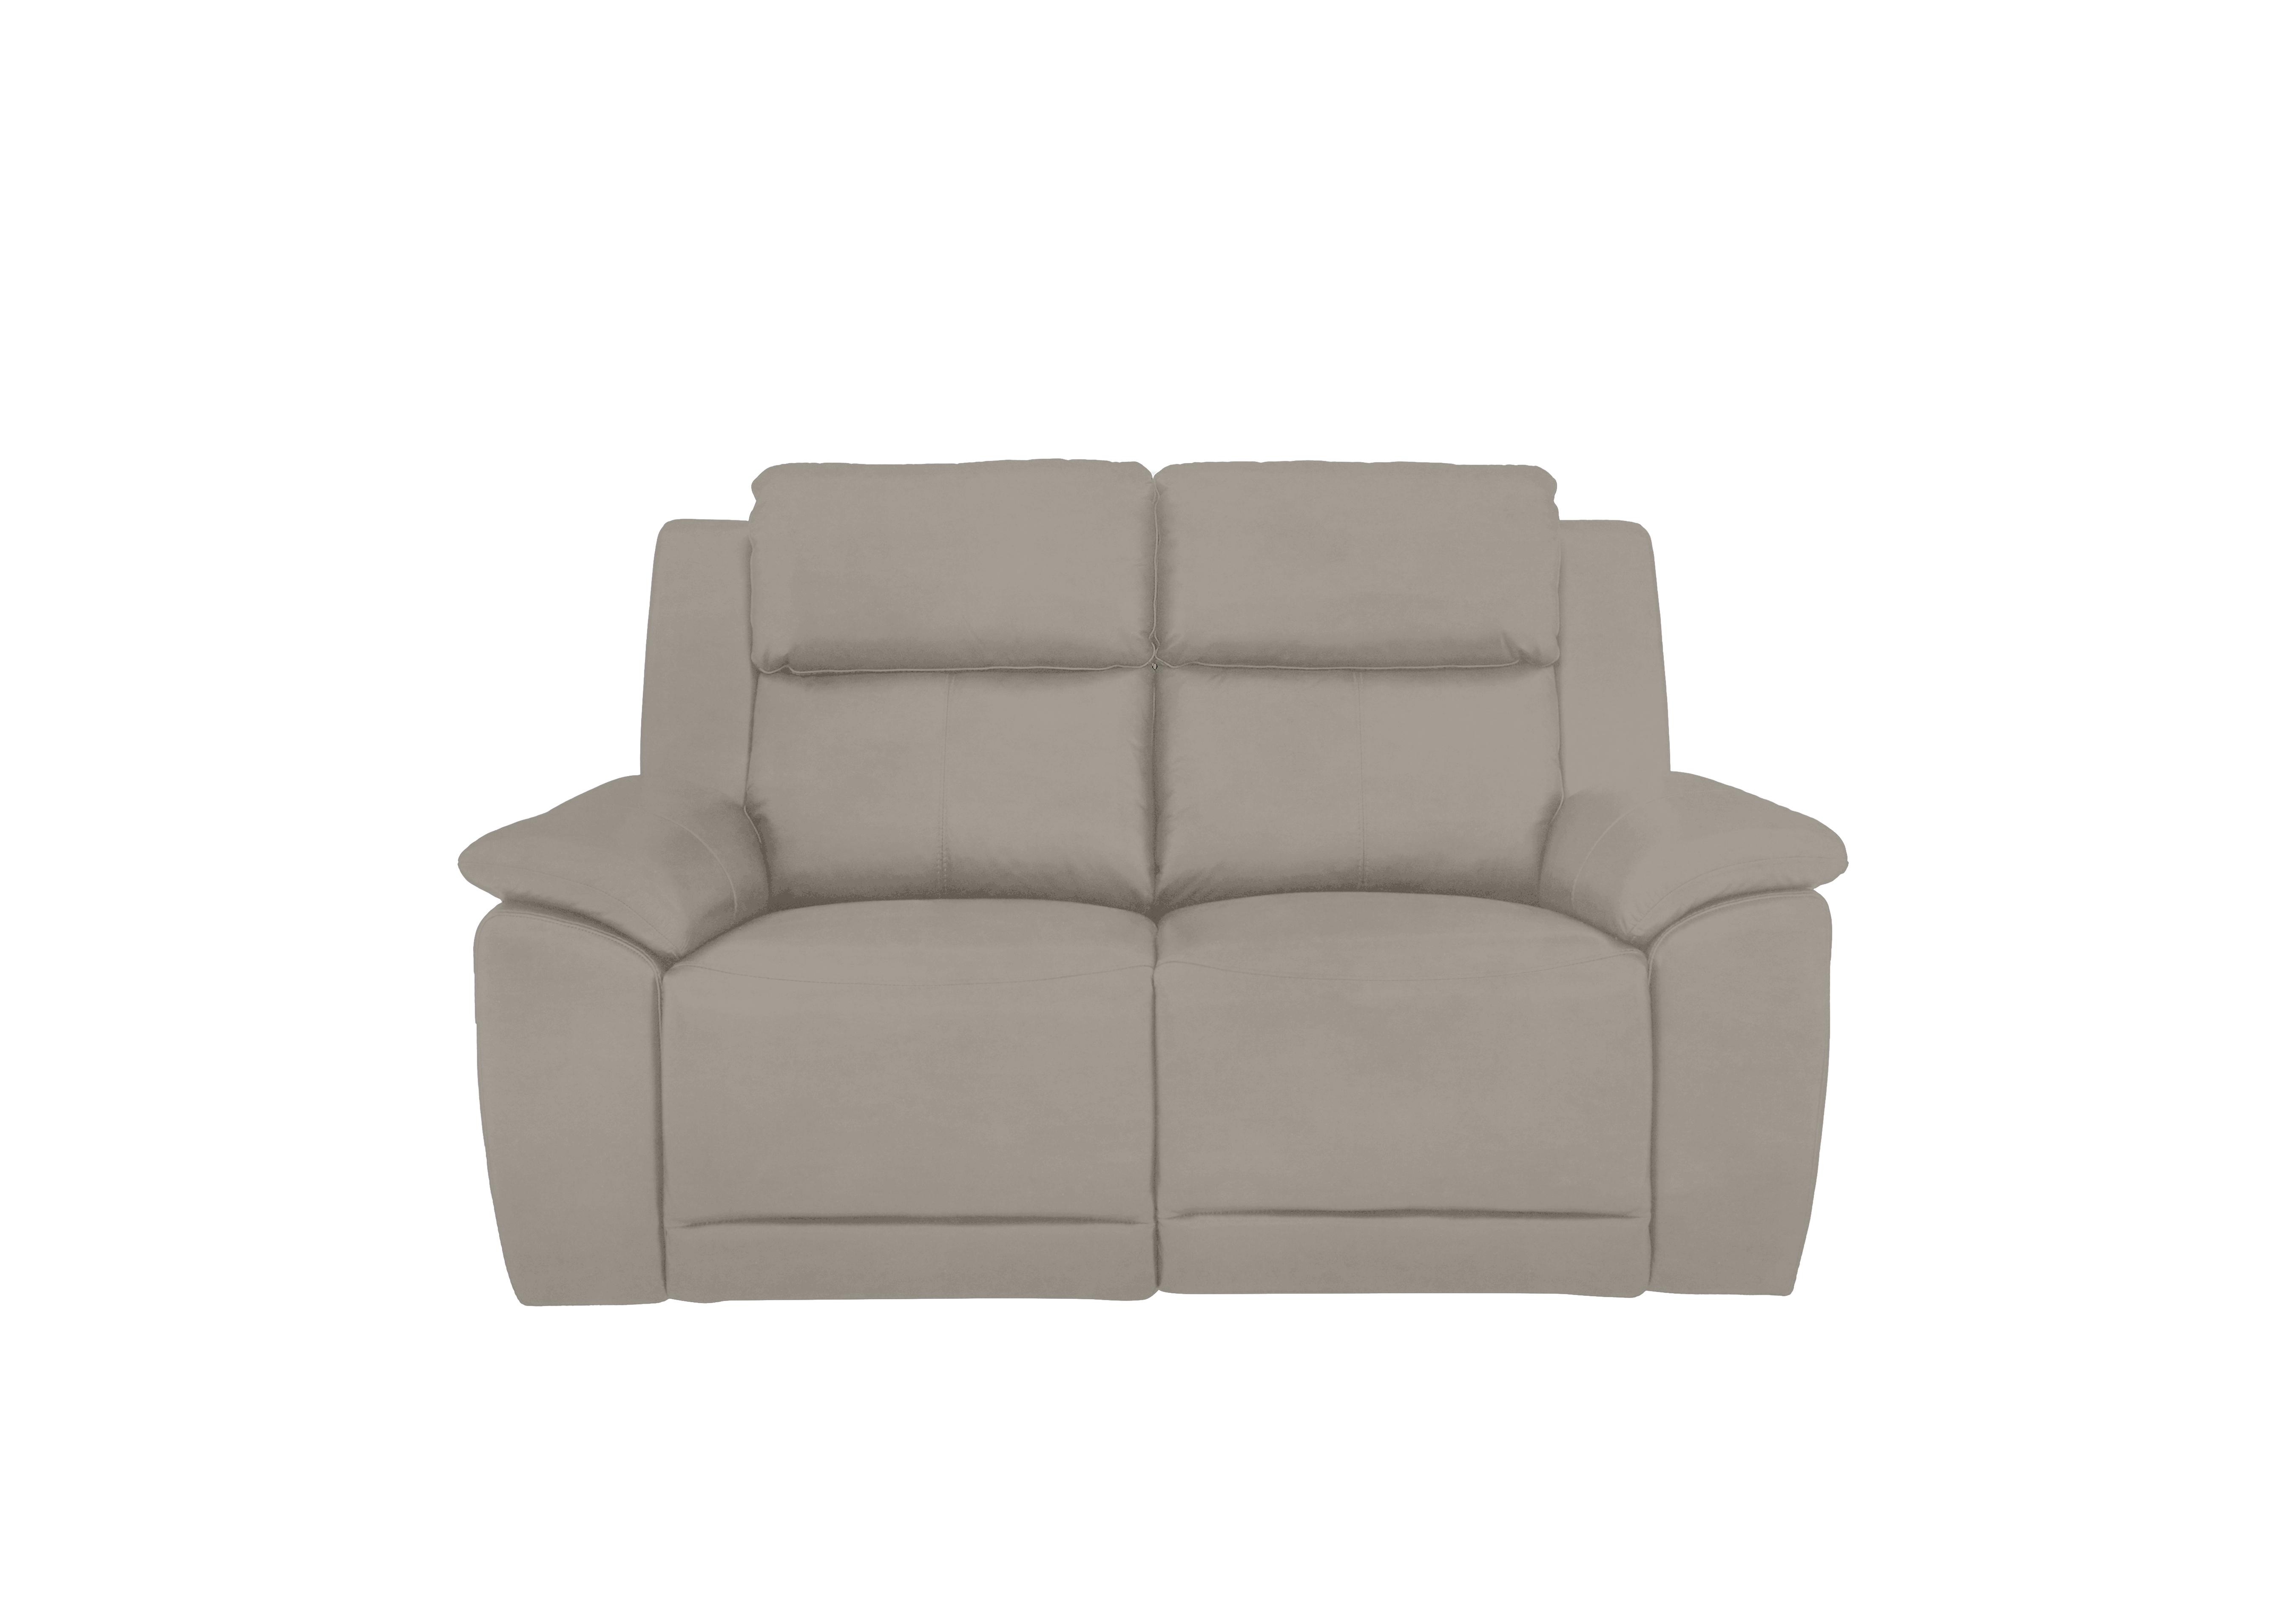 Utah 2 Seater Fabric Power Recliner Sofa with Power Headrests and Power Lumbar in Velvet Sand Vv-0303 on Furniture Village